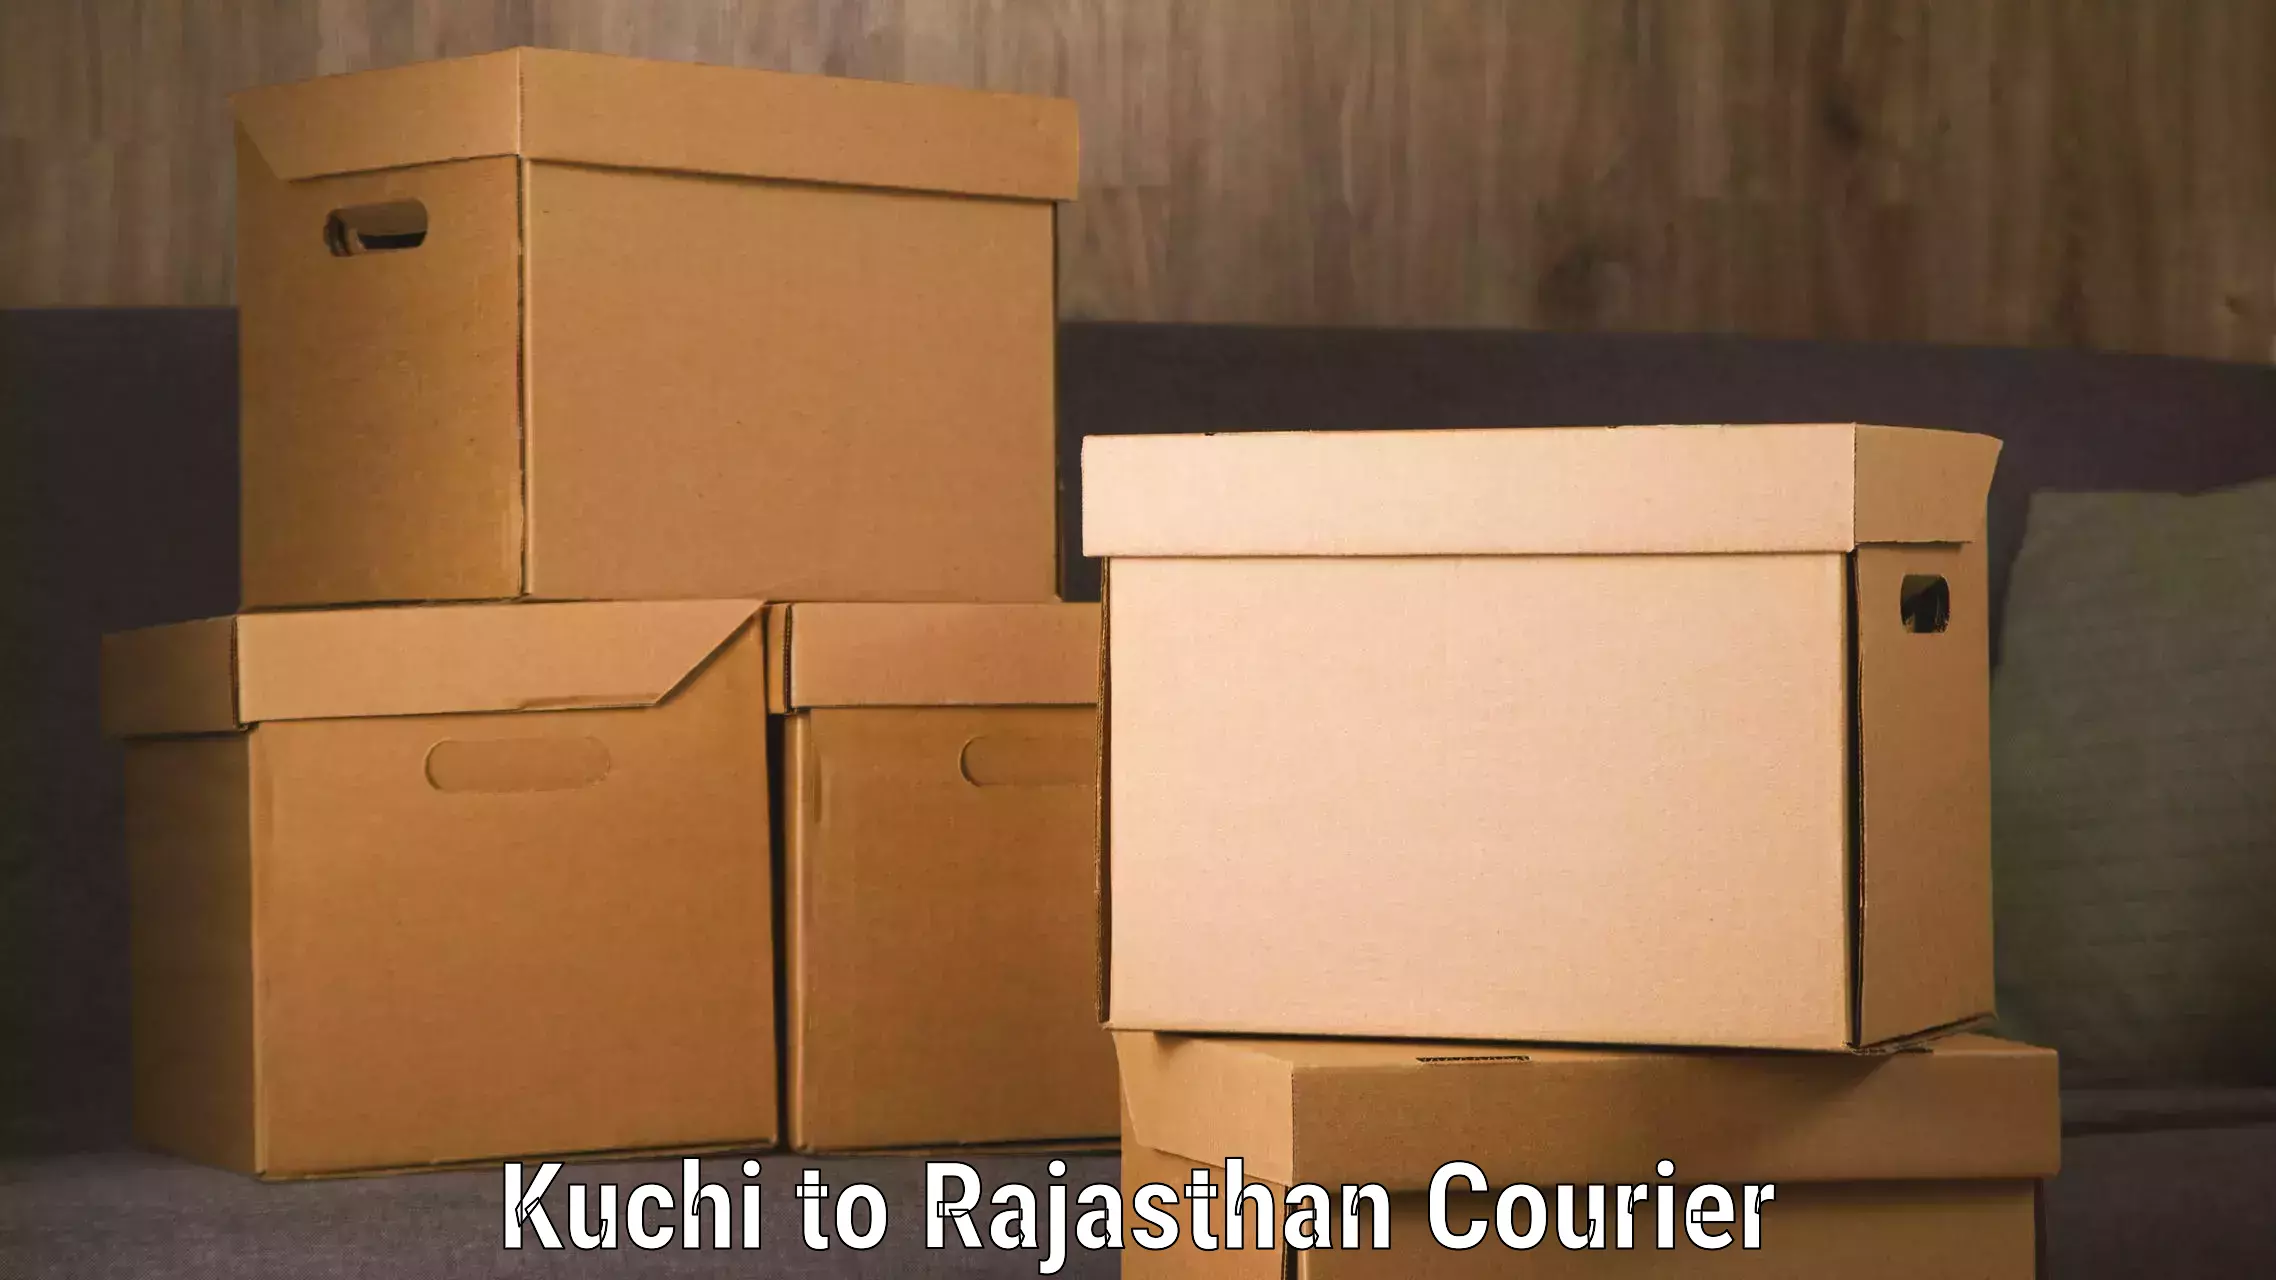 Fast delivery service Kuchi to Rajasthan